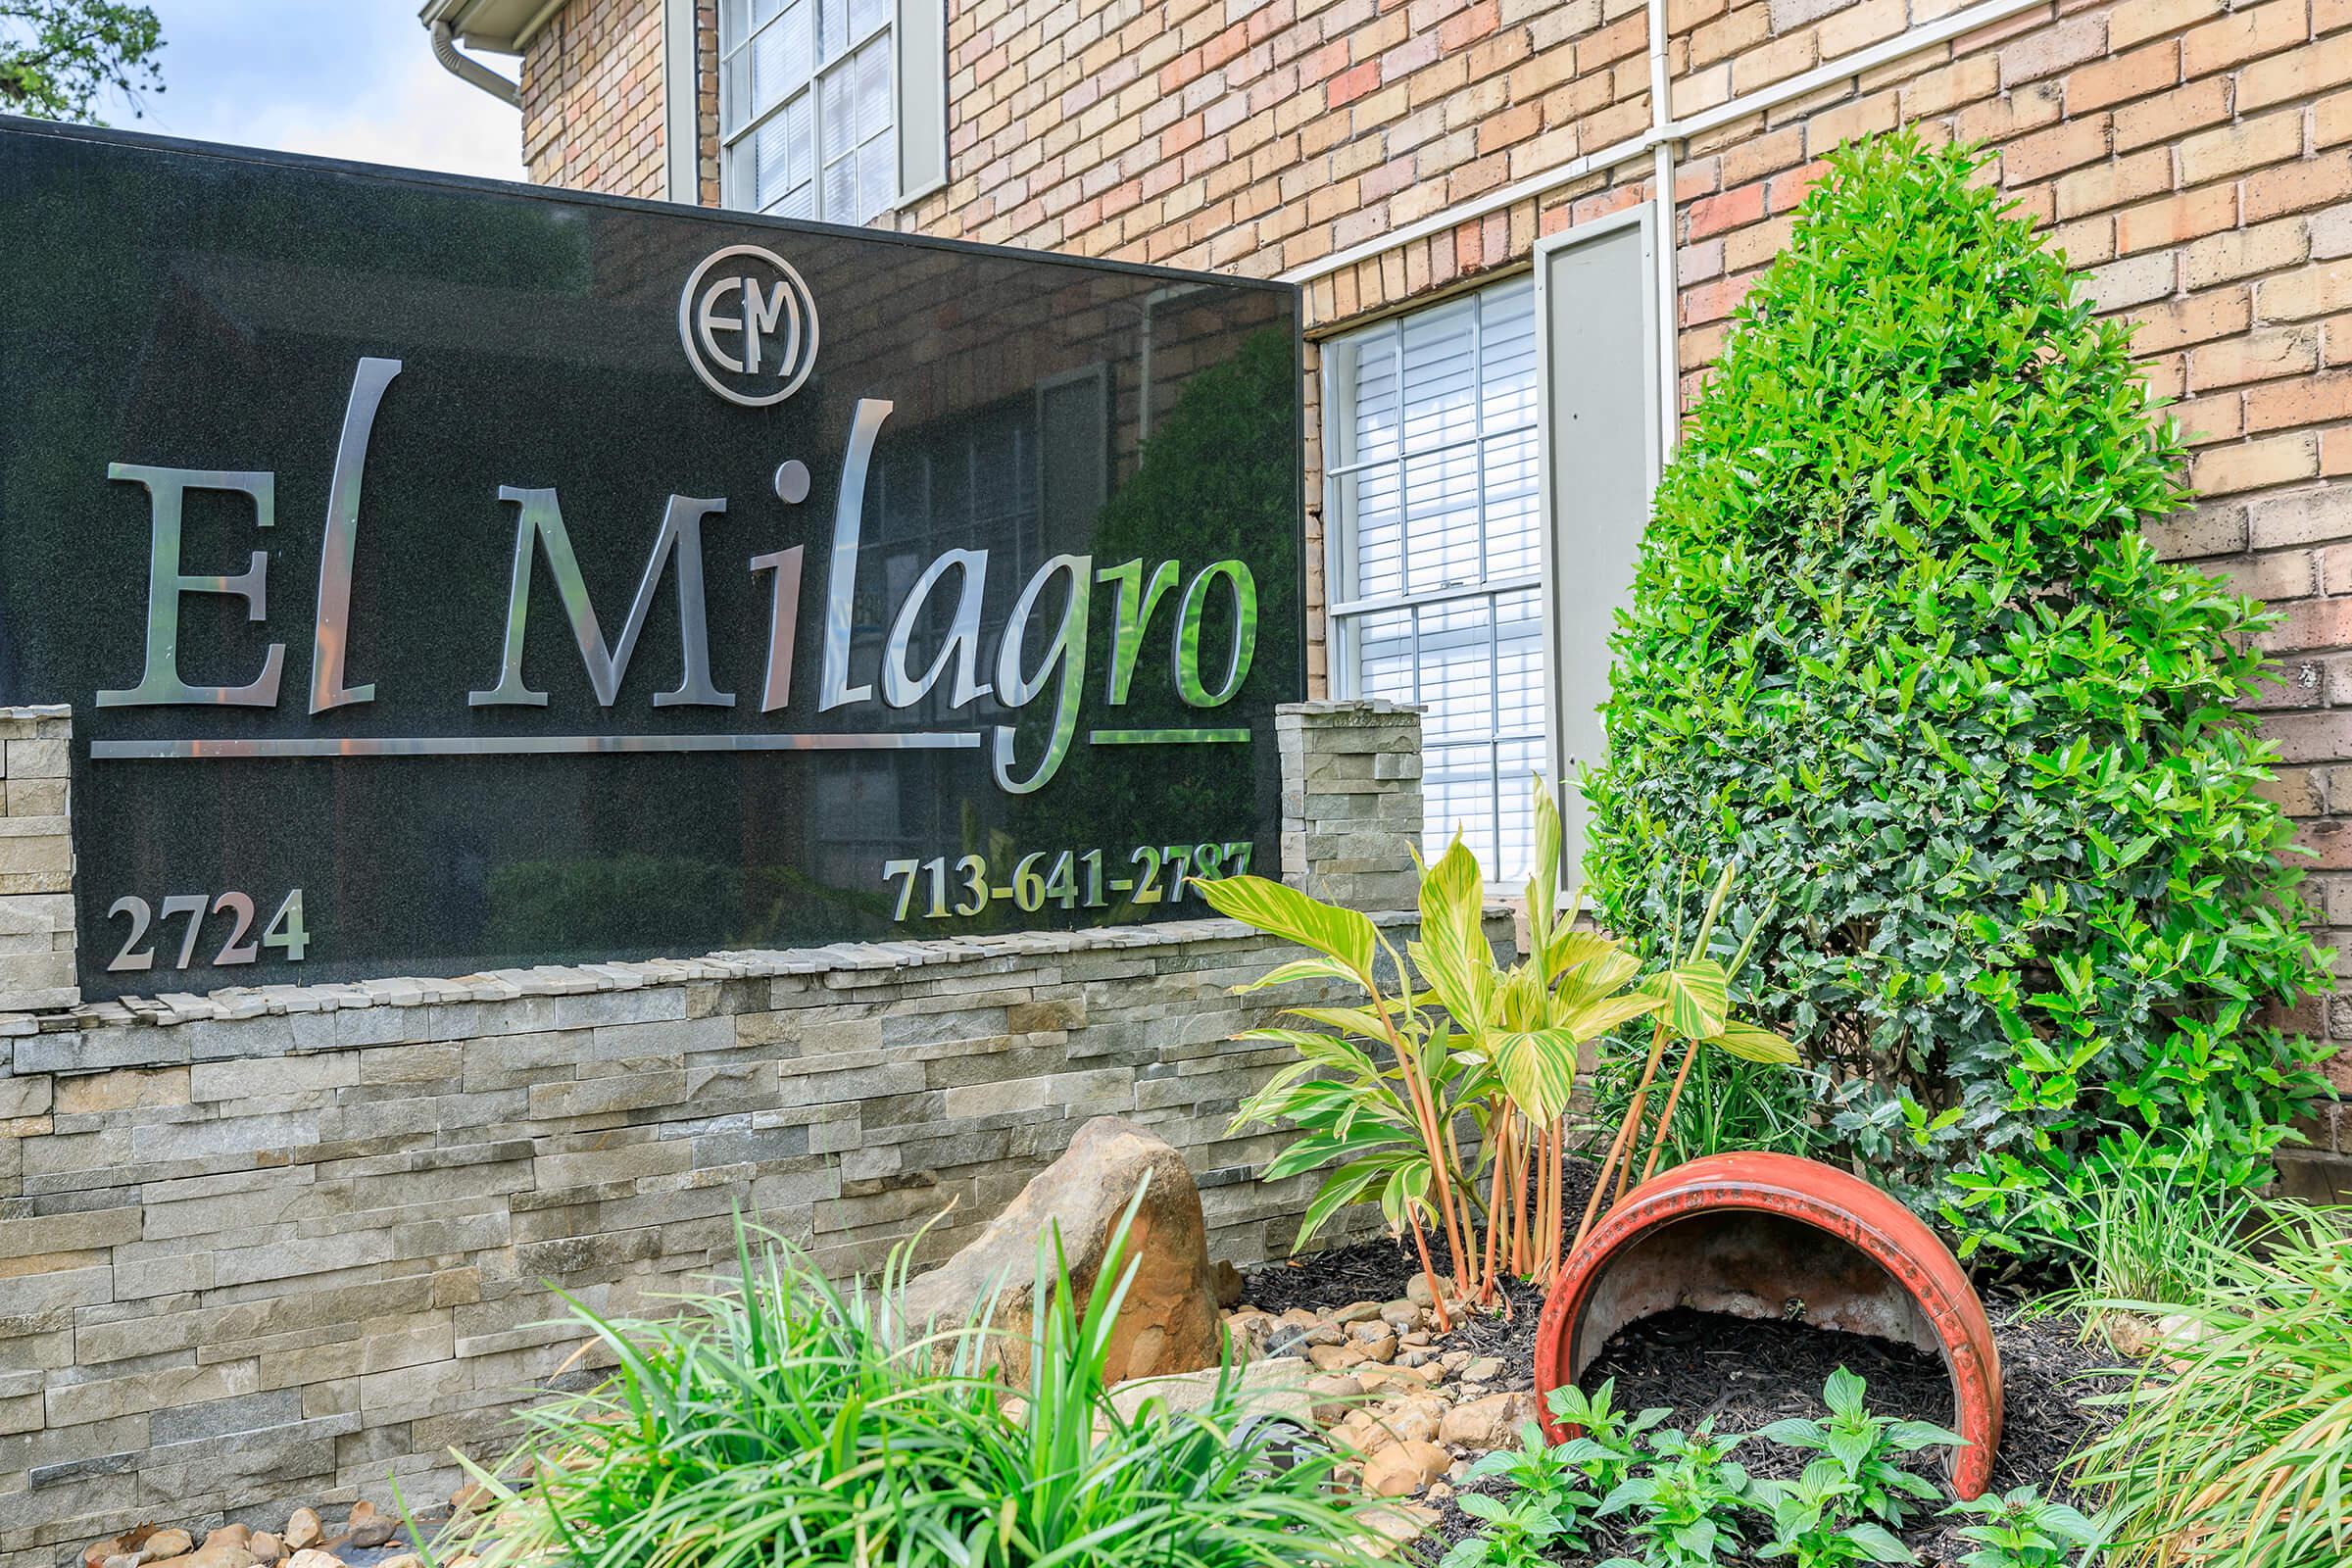 CALL US TODAY FOR YOUR PERSONALIZED TOUR OF PET-FRIENDLY EL MILAGRO APARTMENTS IN HOUSTON, TEXAS